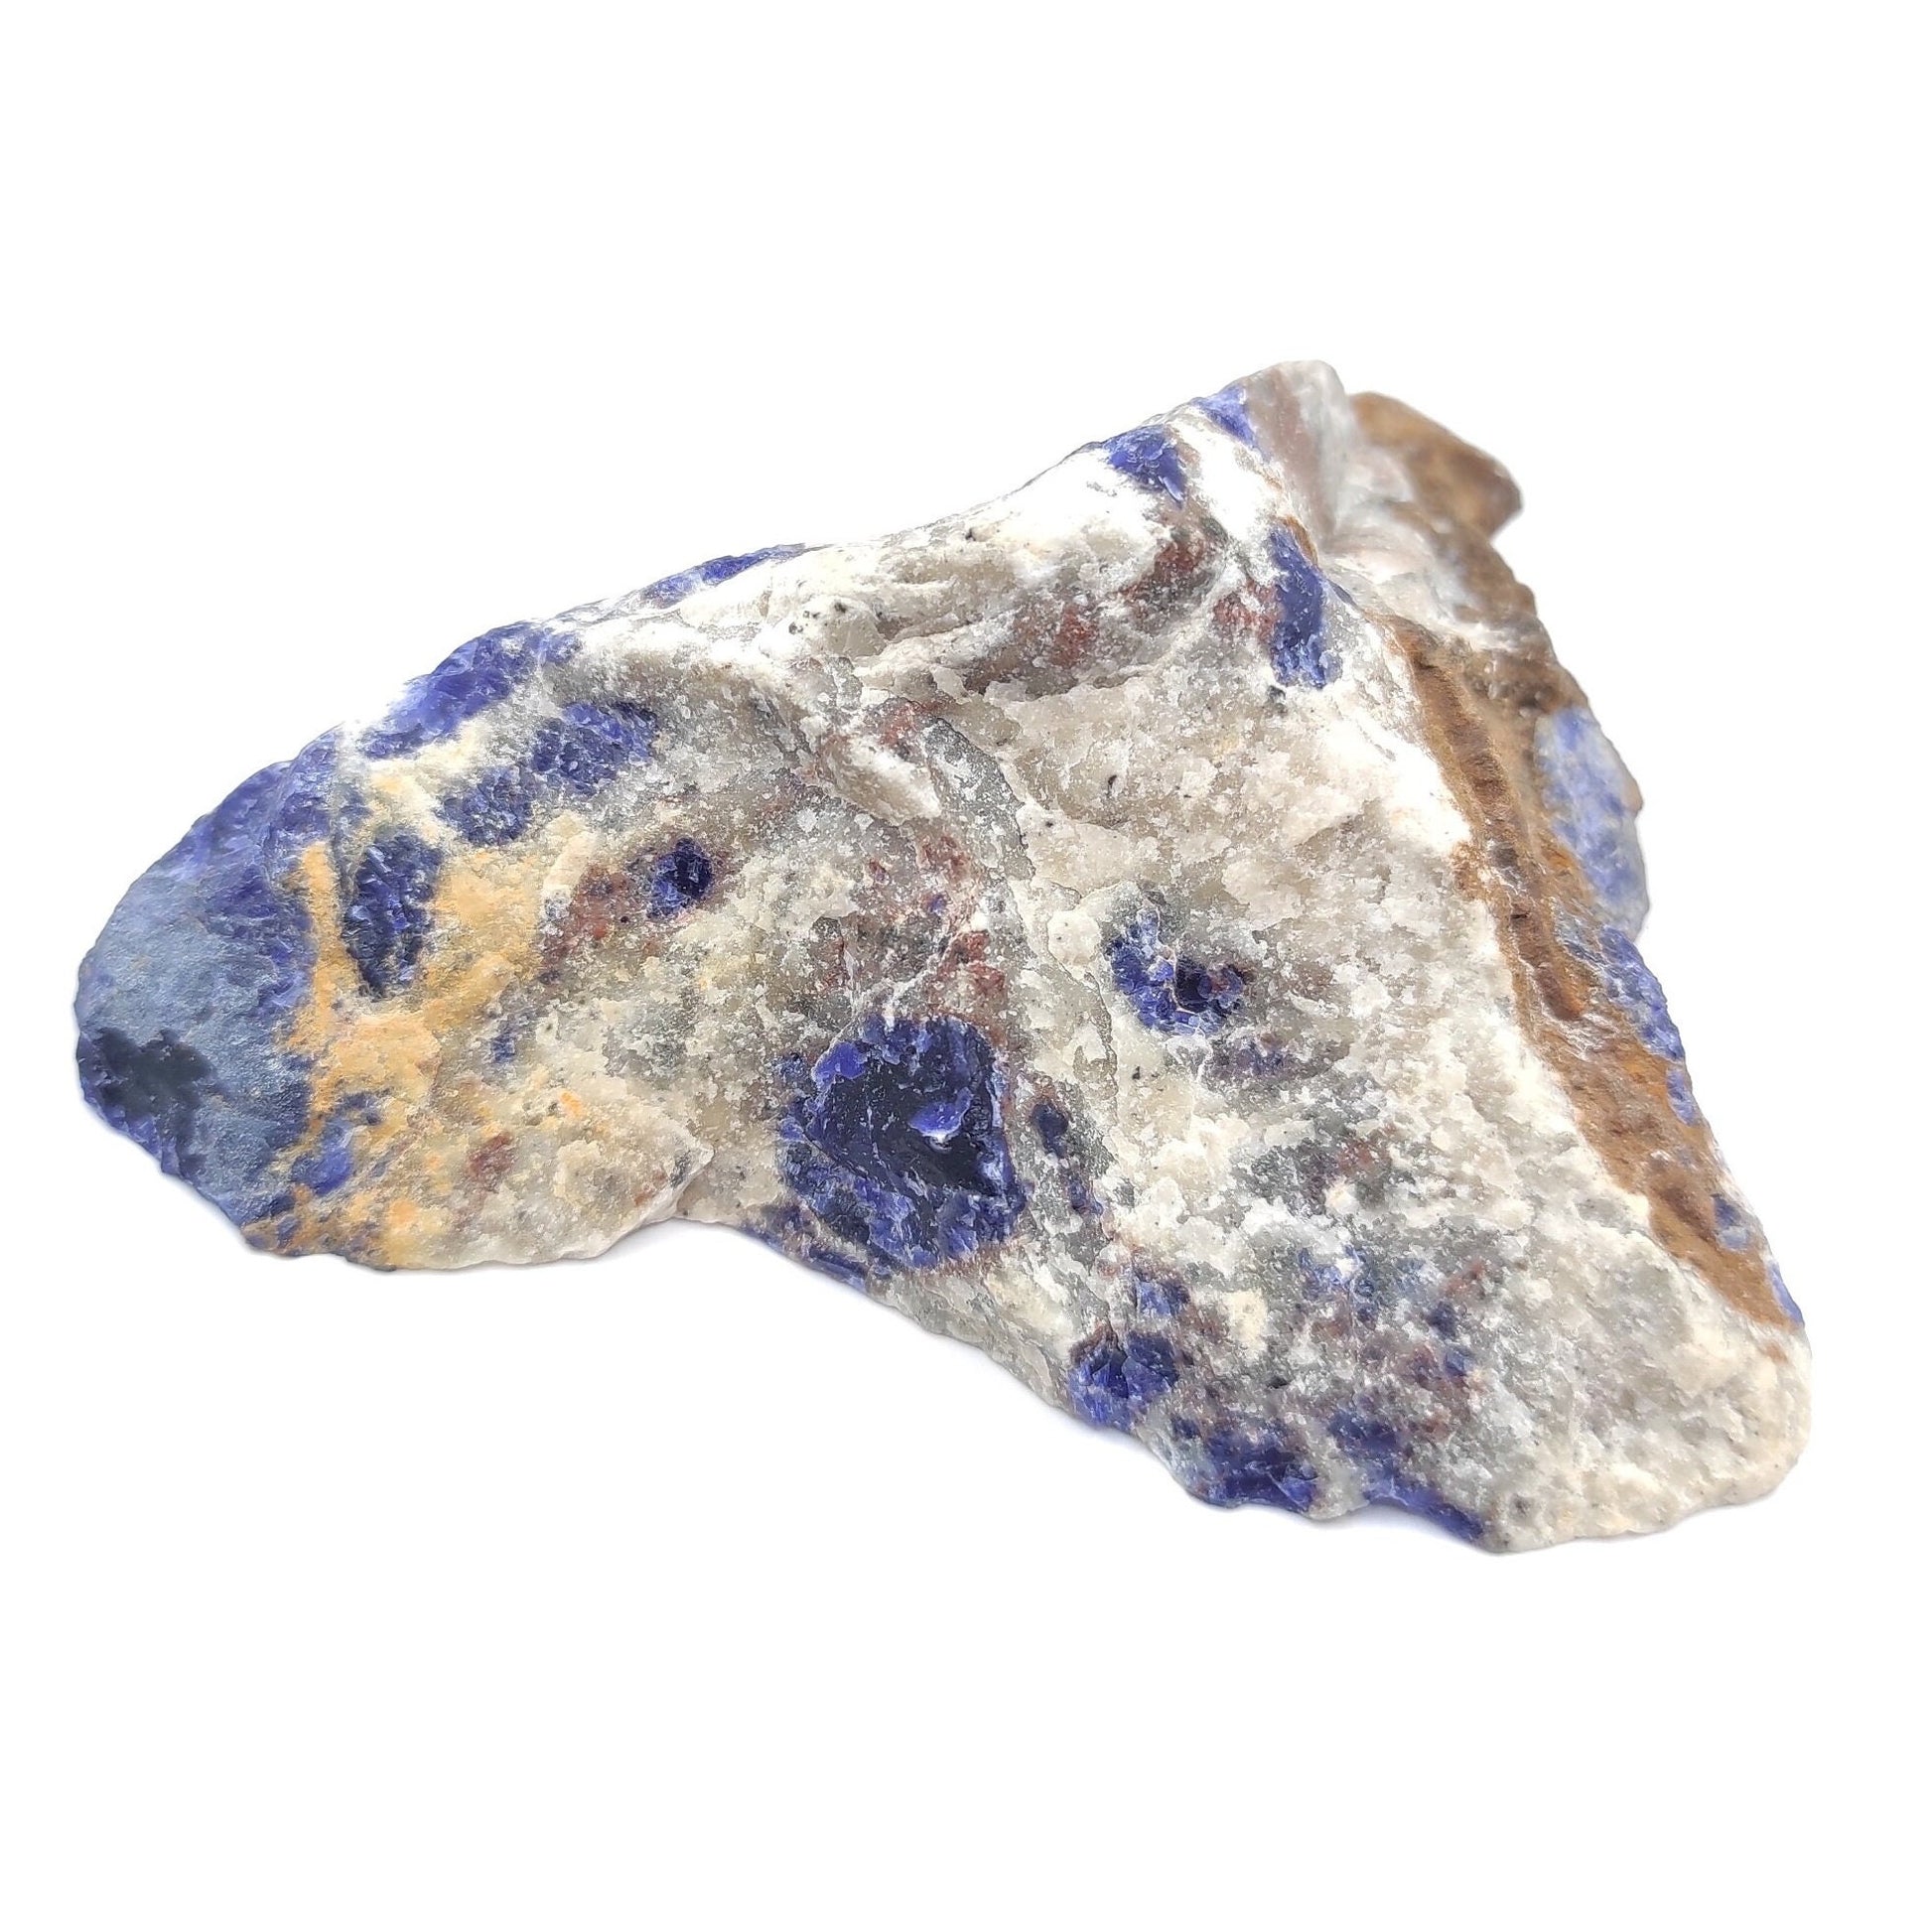 185g Sodalite Piece - Bancroft, Ontario Locality - One Side Cut - Raw Sodalite Specimen - Blue Sodalite Mineral from Canada - For Lapidary